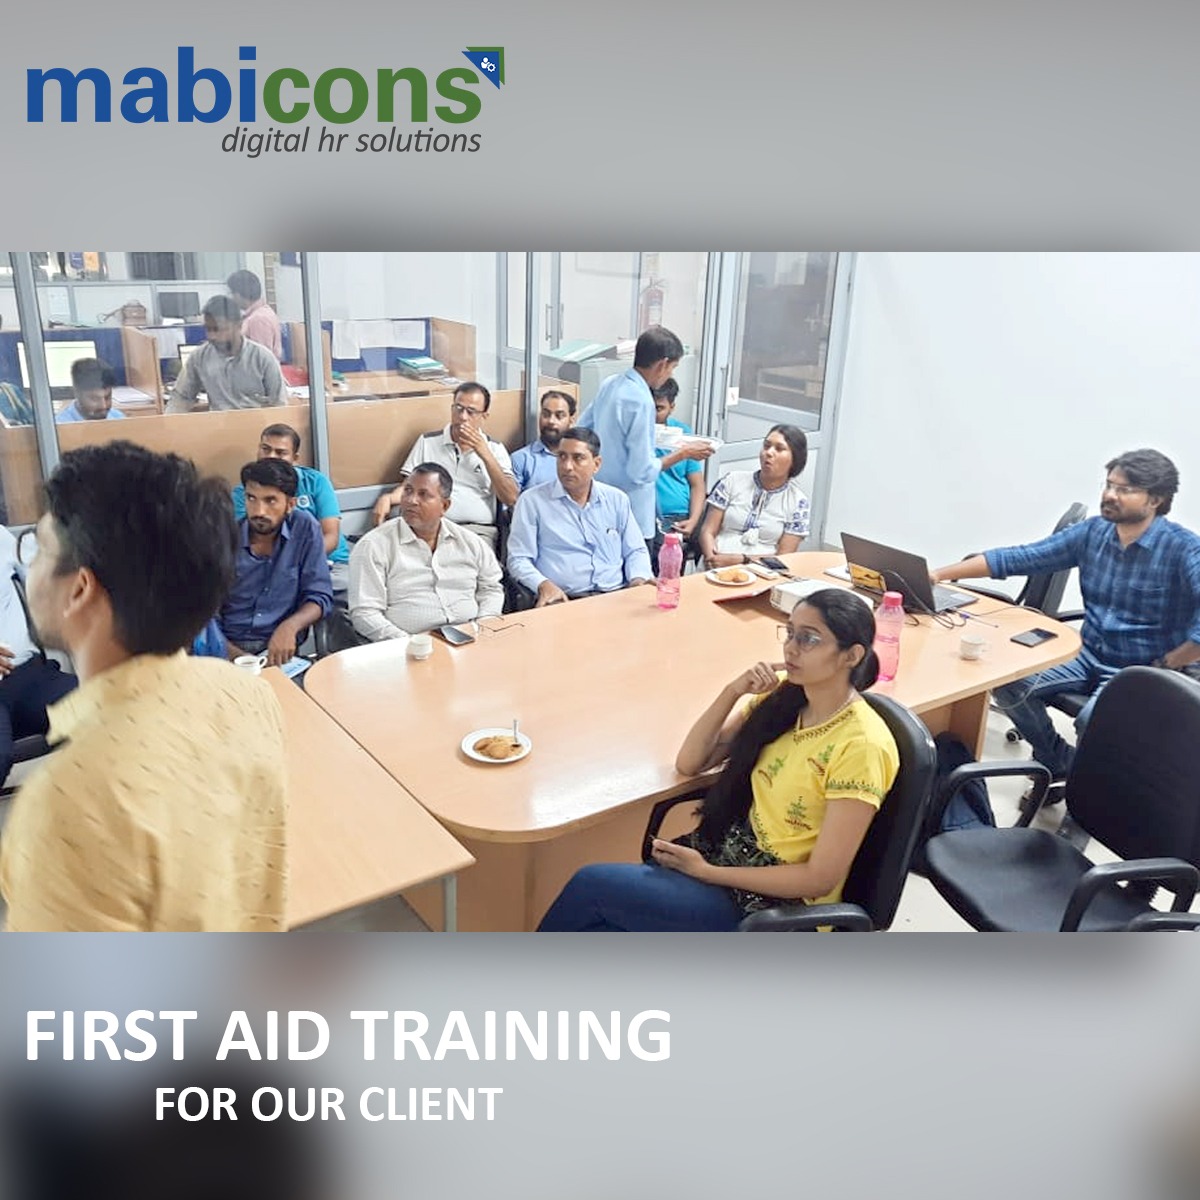 first aid training for our client.
.
.
.
.
#FirstAid #Emergency #survivaltraining #training #lifesave #LifeSaving #collage #school #corporation #factorespsicosociales #EmergencySurvivalTraining #best #workplacesafety #workplace #injuries #firstaidtraining #firstaidcourse